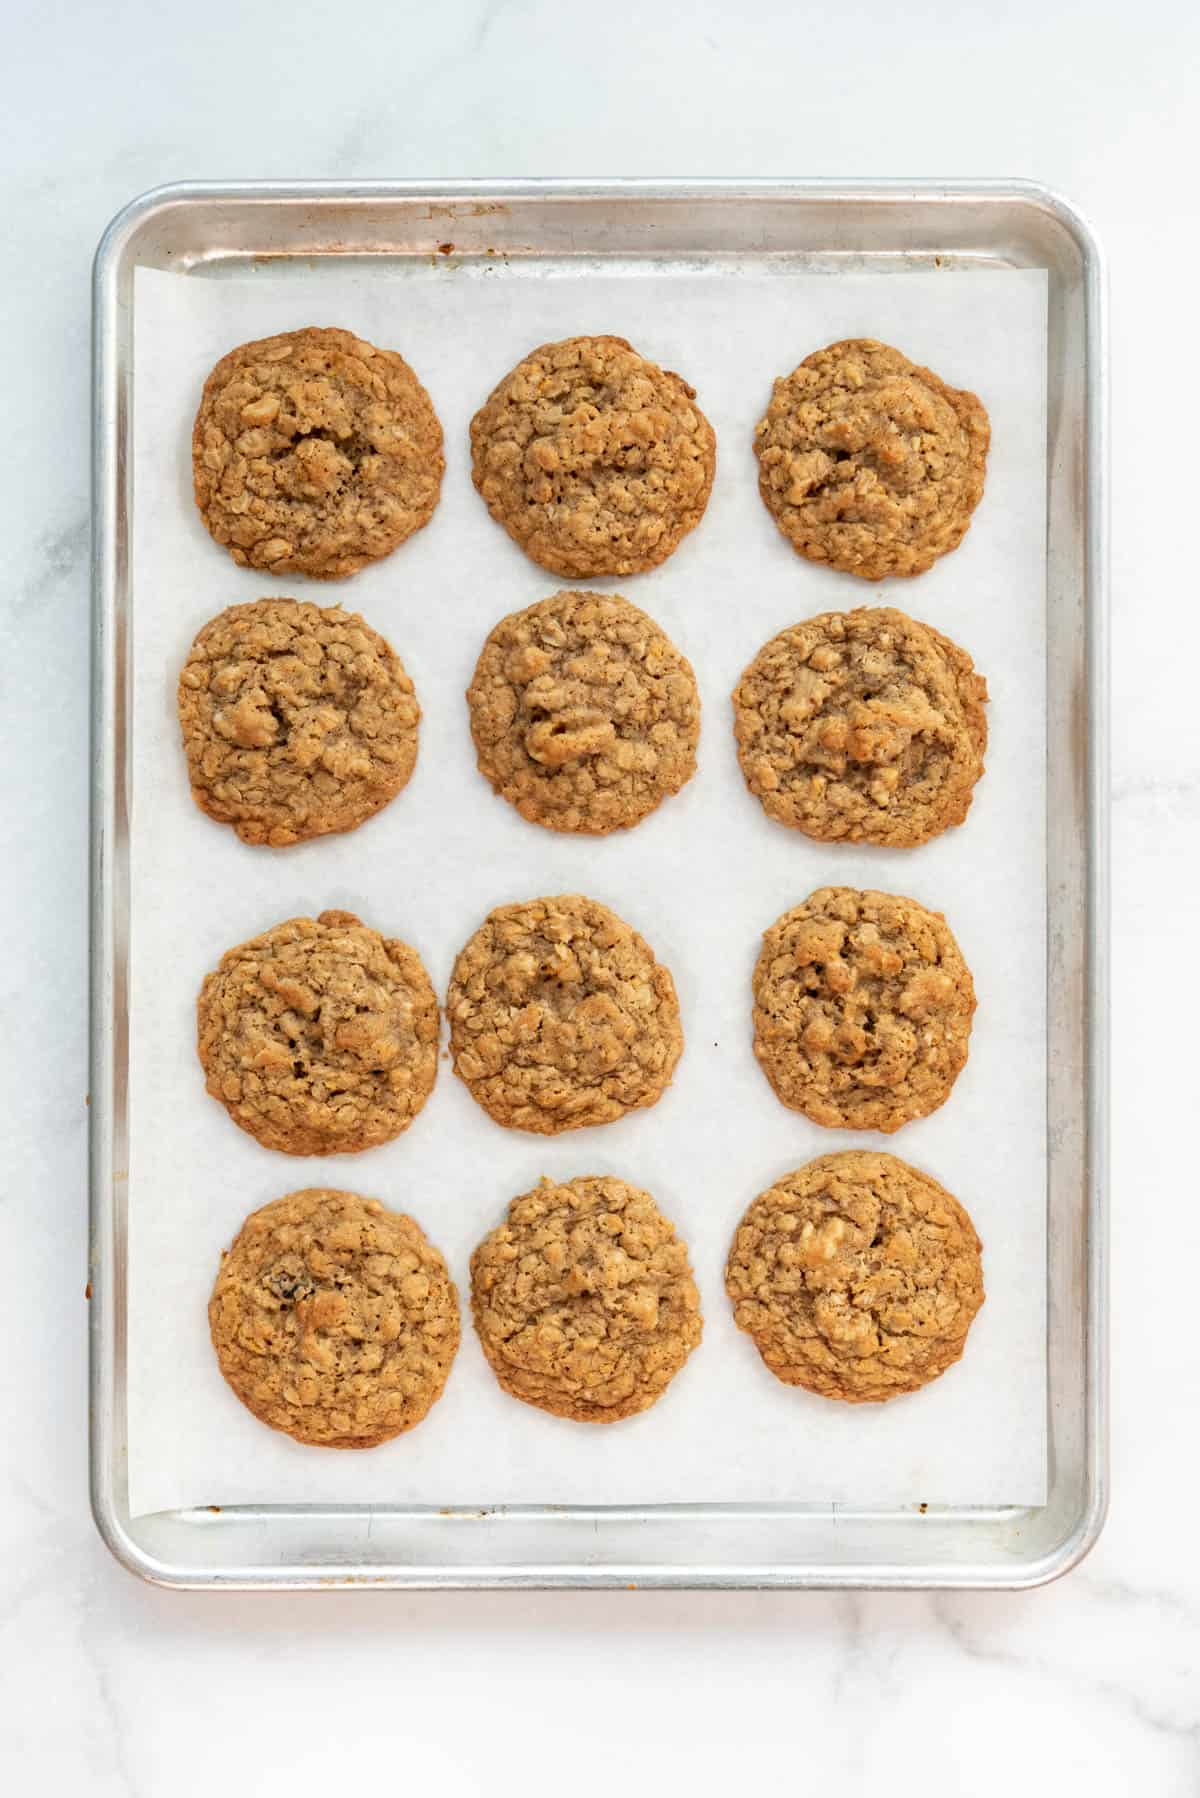 Baked ranger cookies on a baking sheet lined with parchment paper.